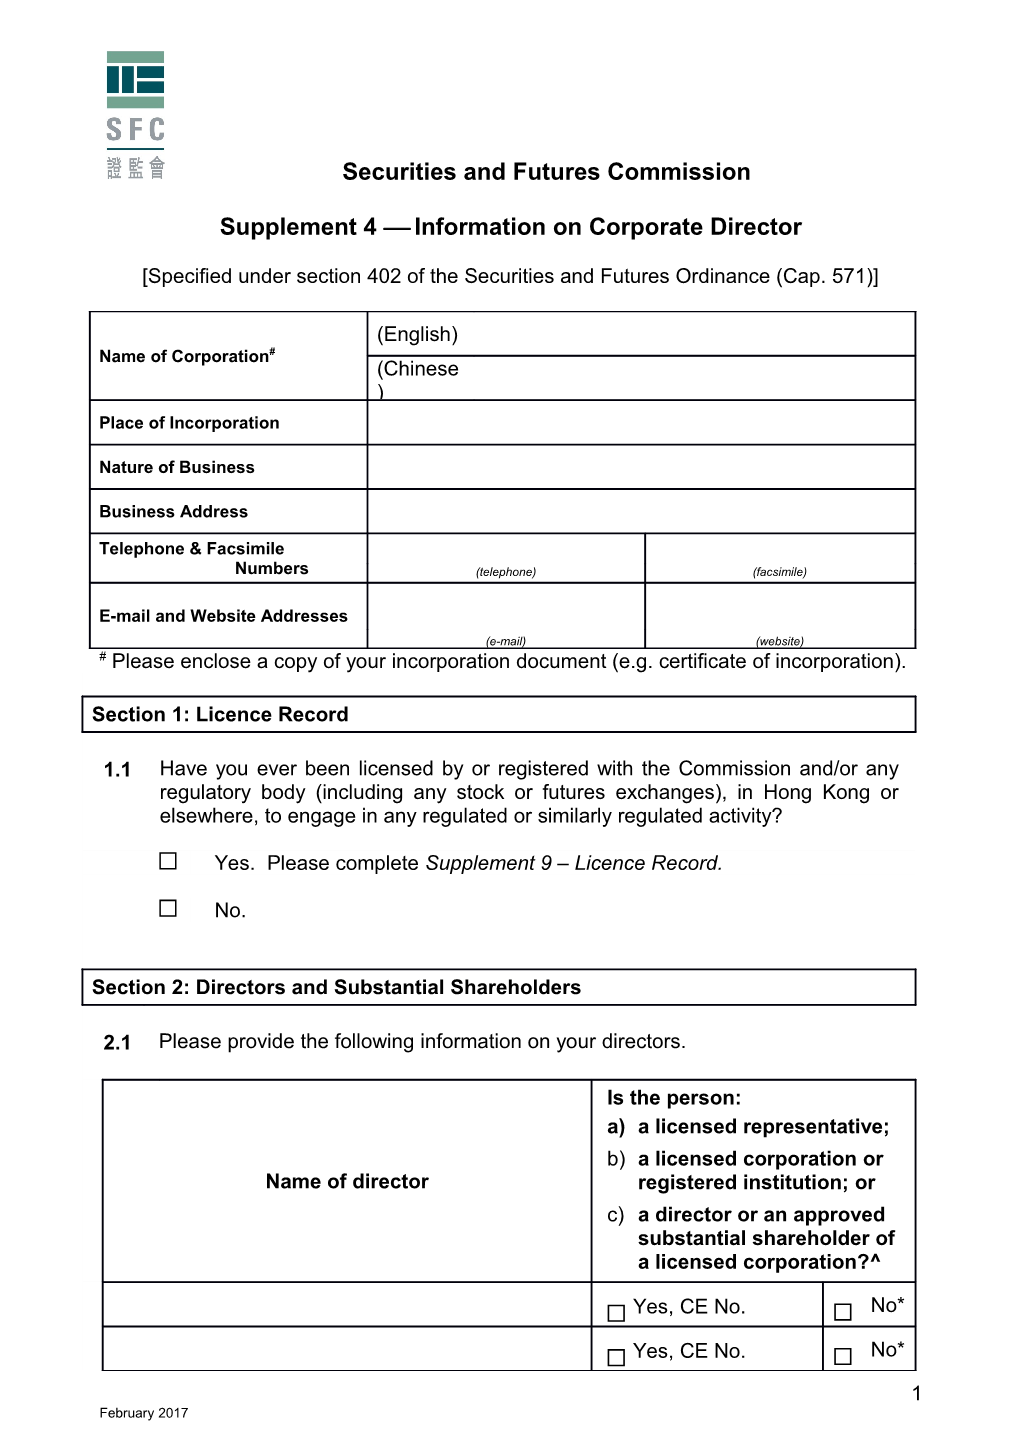 Supplement 4 Information on Corporate Director